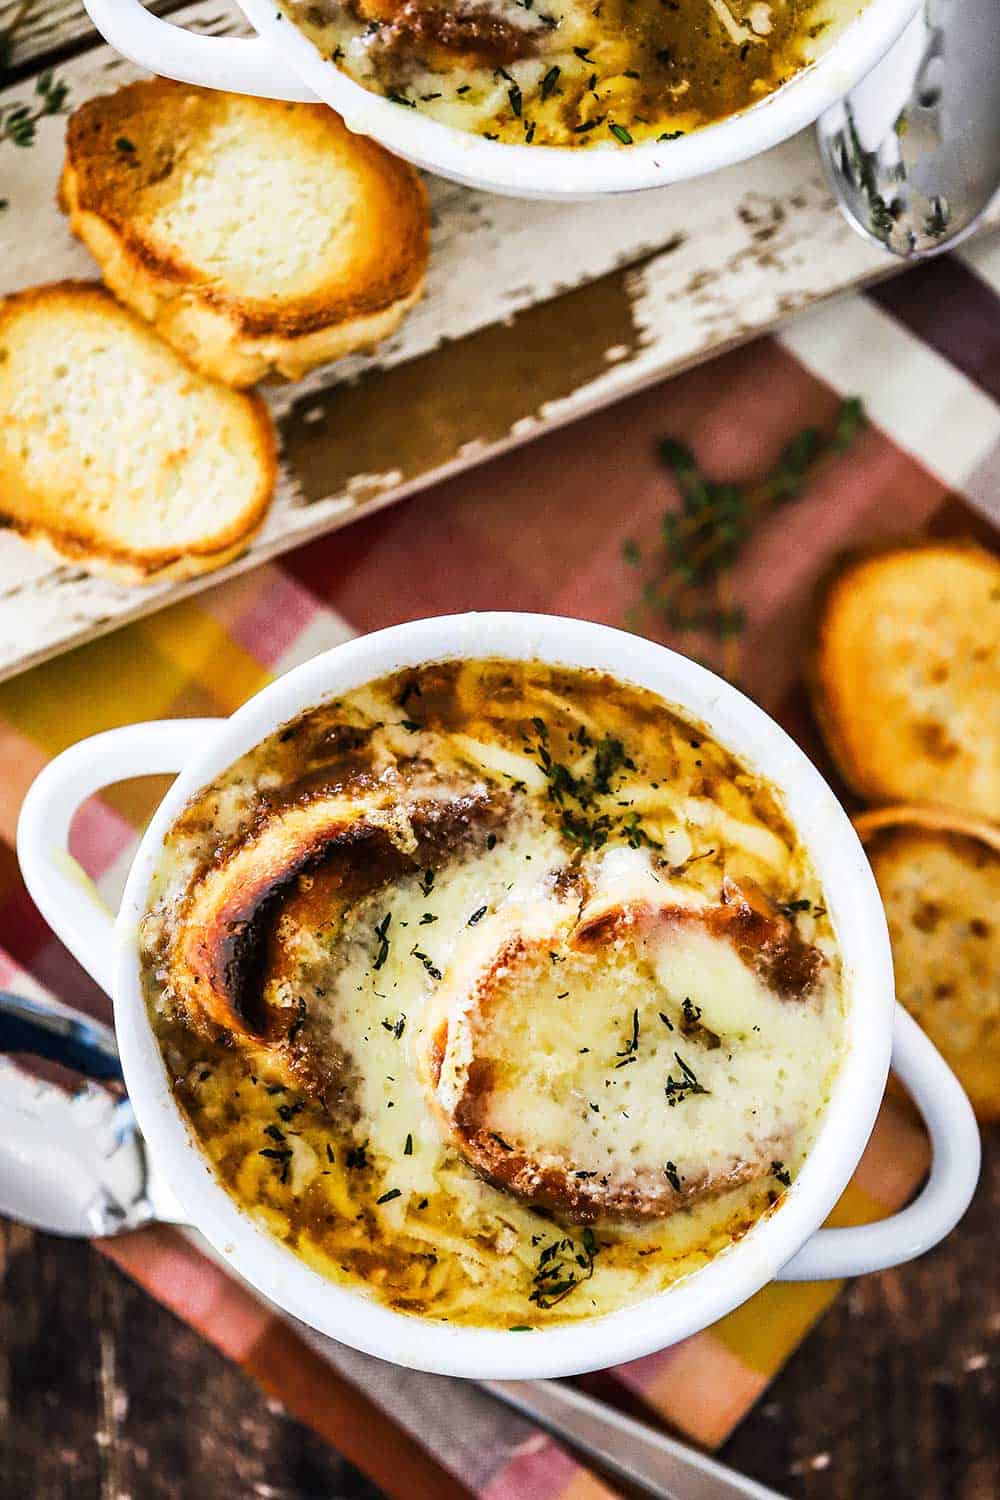 Two white bowls filled with French onion soup and topped with toasted bread slices and melted cheese.